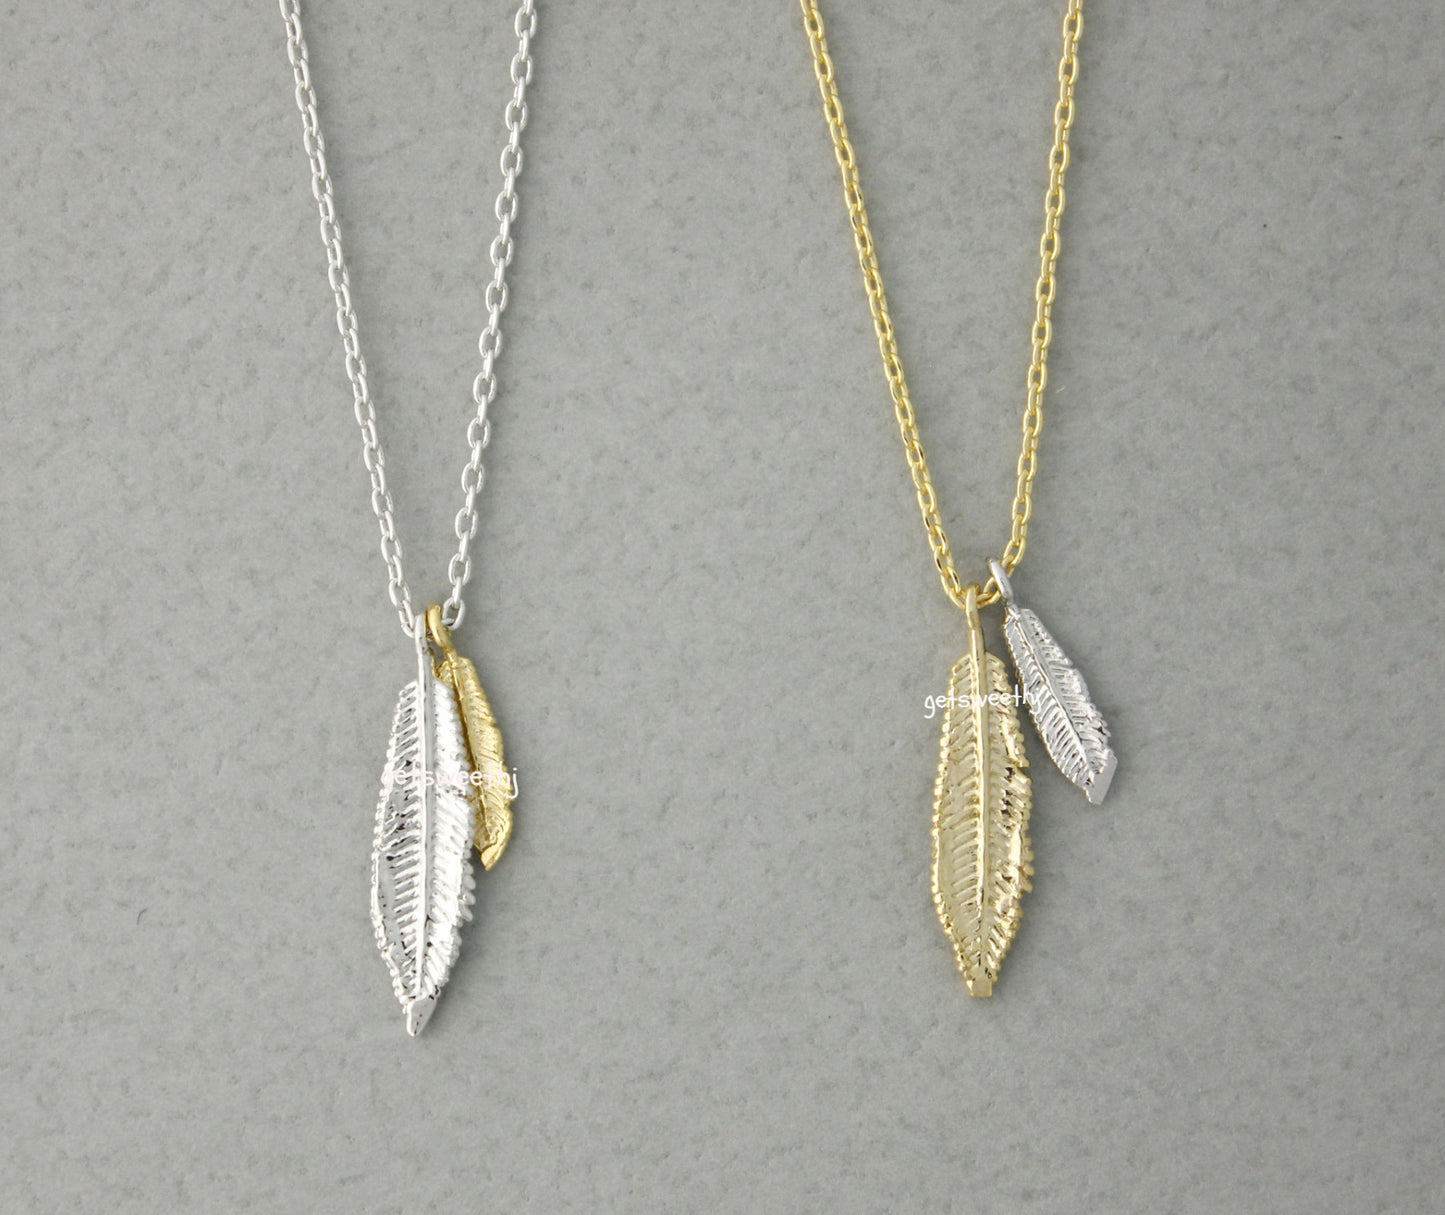 Feather Leaf Pendant Necklace in Gold / Silver